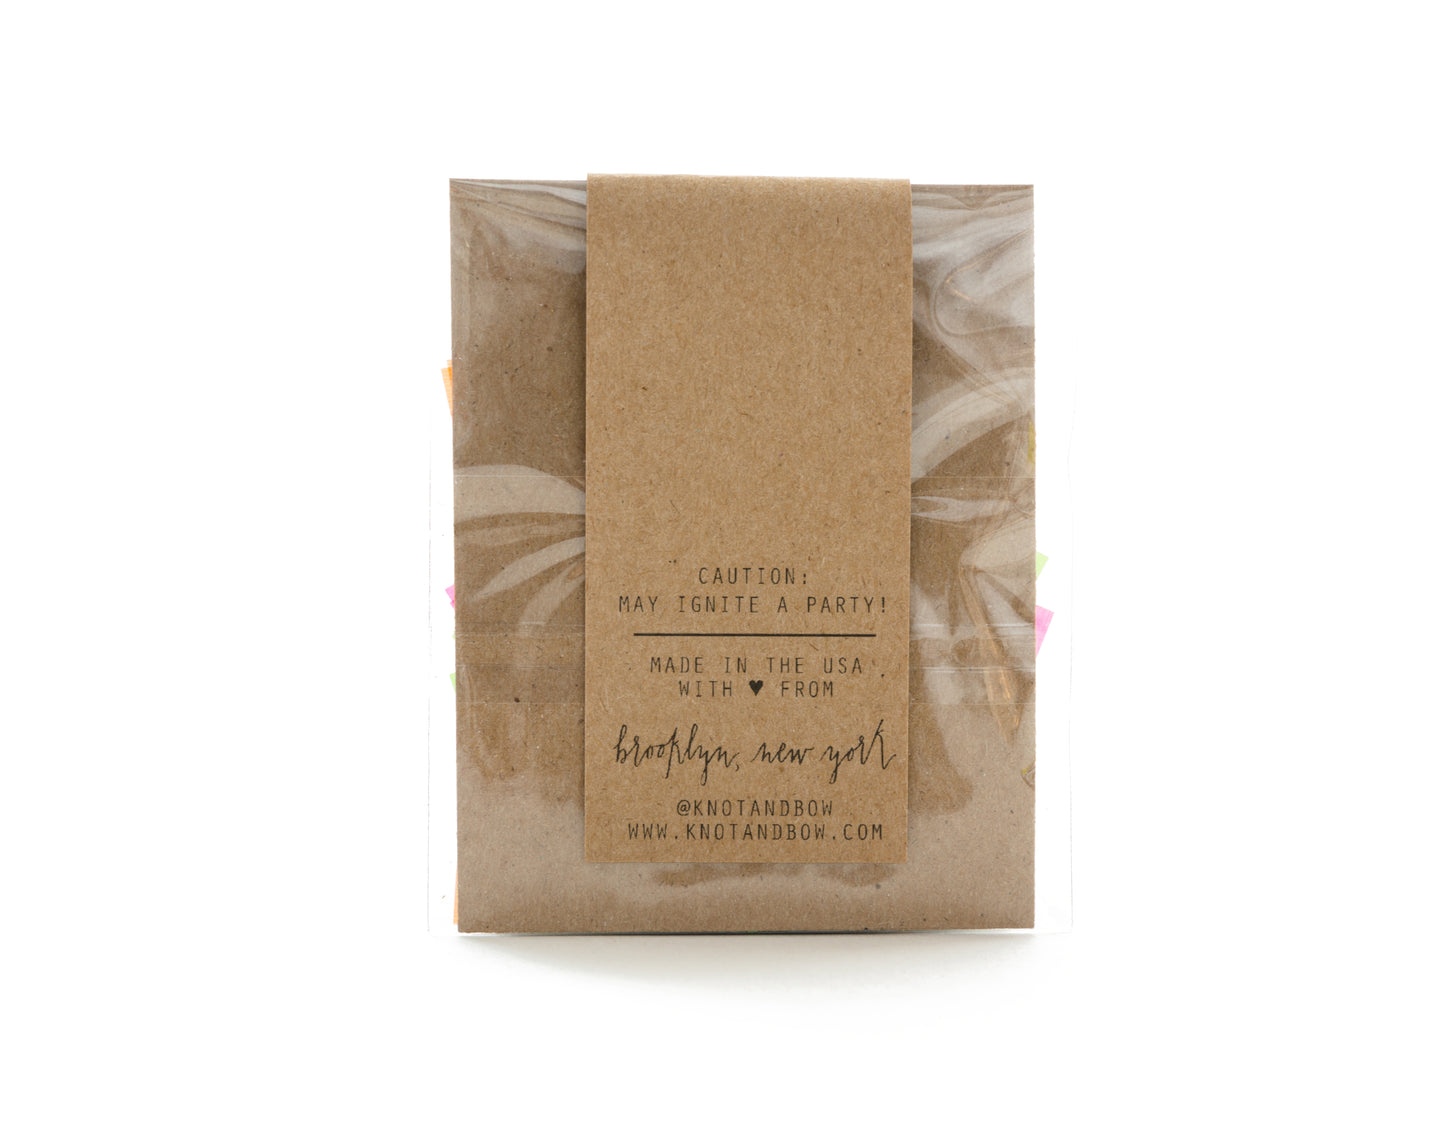 Single Serving Size Confetti by Knot & Bow